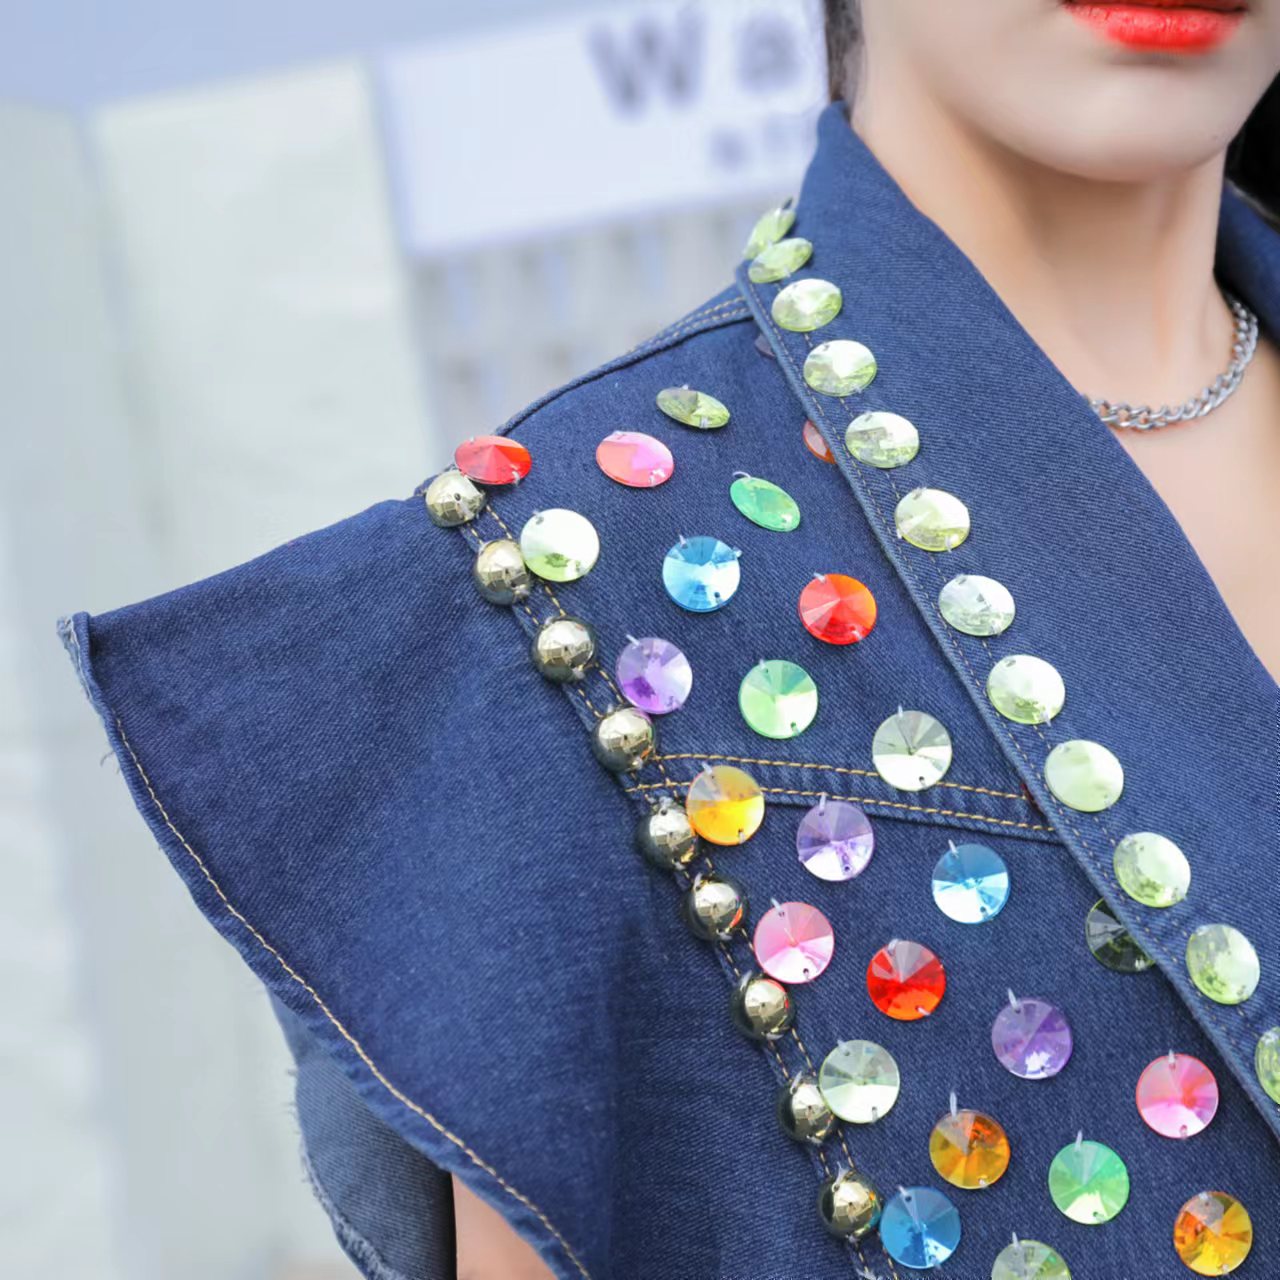 Close-up of a person wearing a Maramalive™ Heavy Duty Diamond Studded Denim Vest With Wooden Ear Edge with colorful, round reflective studs and gold beads. The blue coat features beaded sequins that catch the light. The person is also wearing a silver necklace and has bright red lipstick.